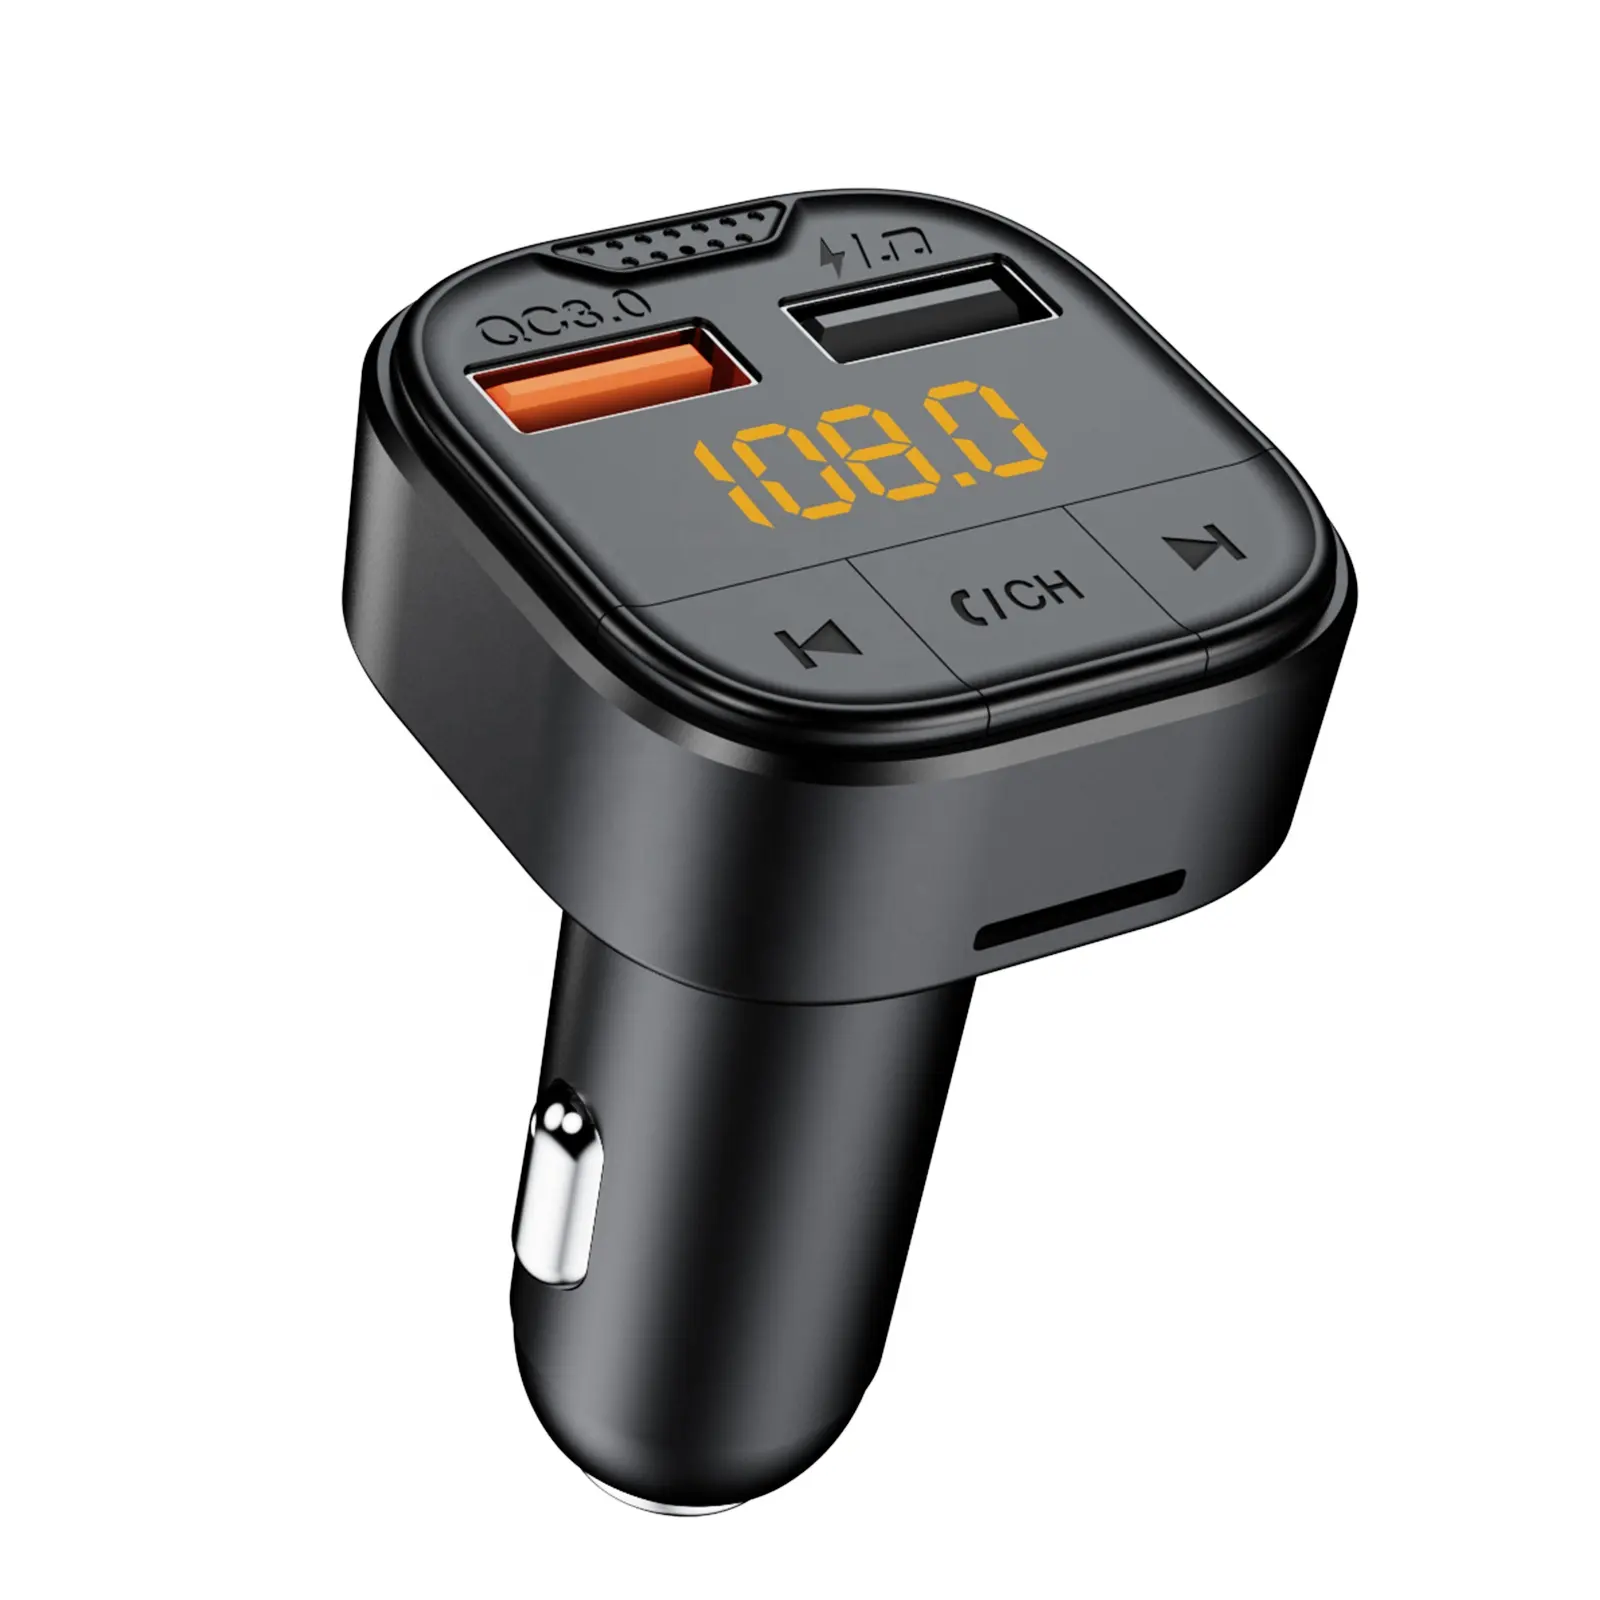 AGETUNR NEW T80 Bluetooth Car Kit Handsfree Stereo FM Transmitter MP3 Player 18W QC3.0 fast charge activate phone voice control